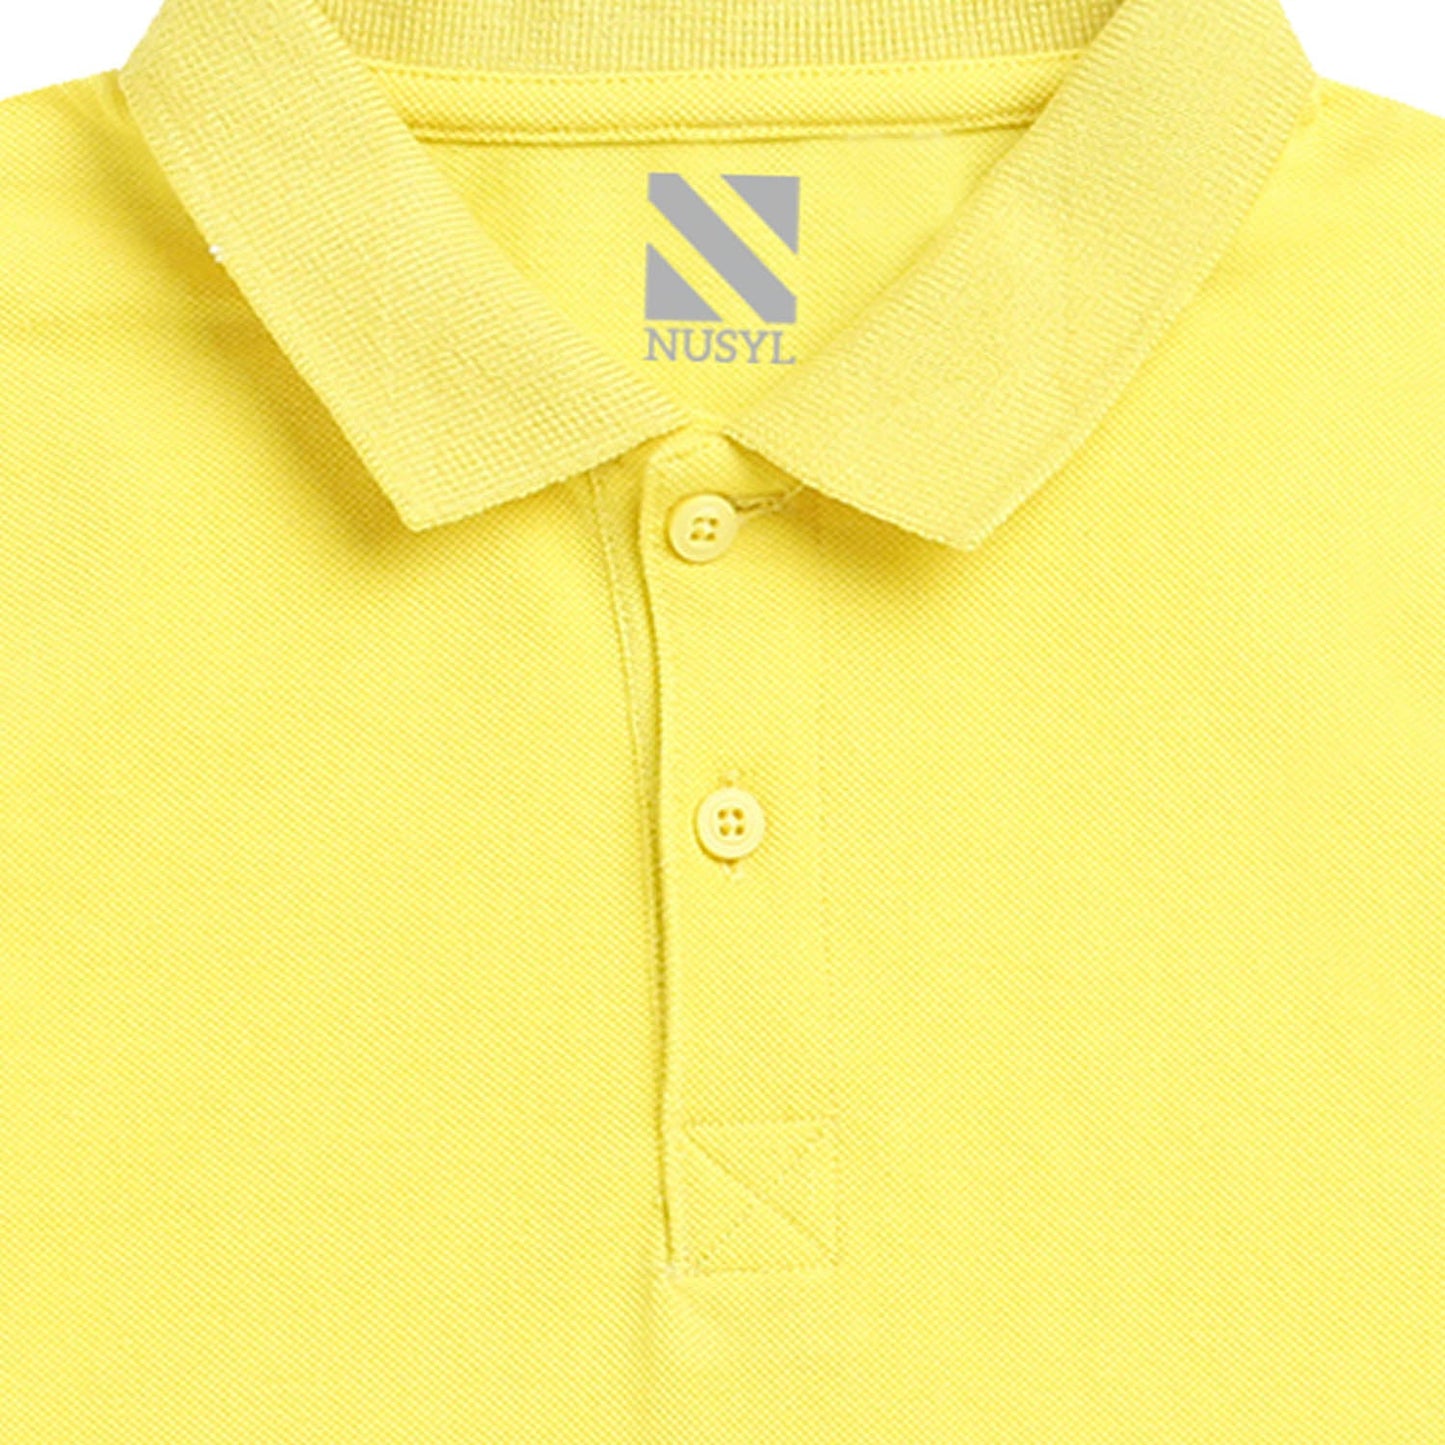 Nusyl Solid Bright Yellow Infants Polo t-shirt